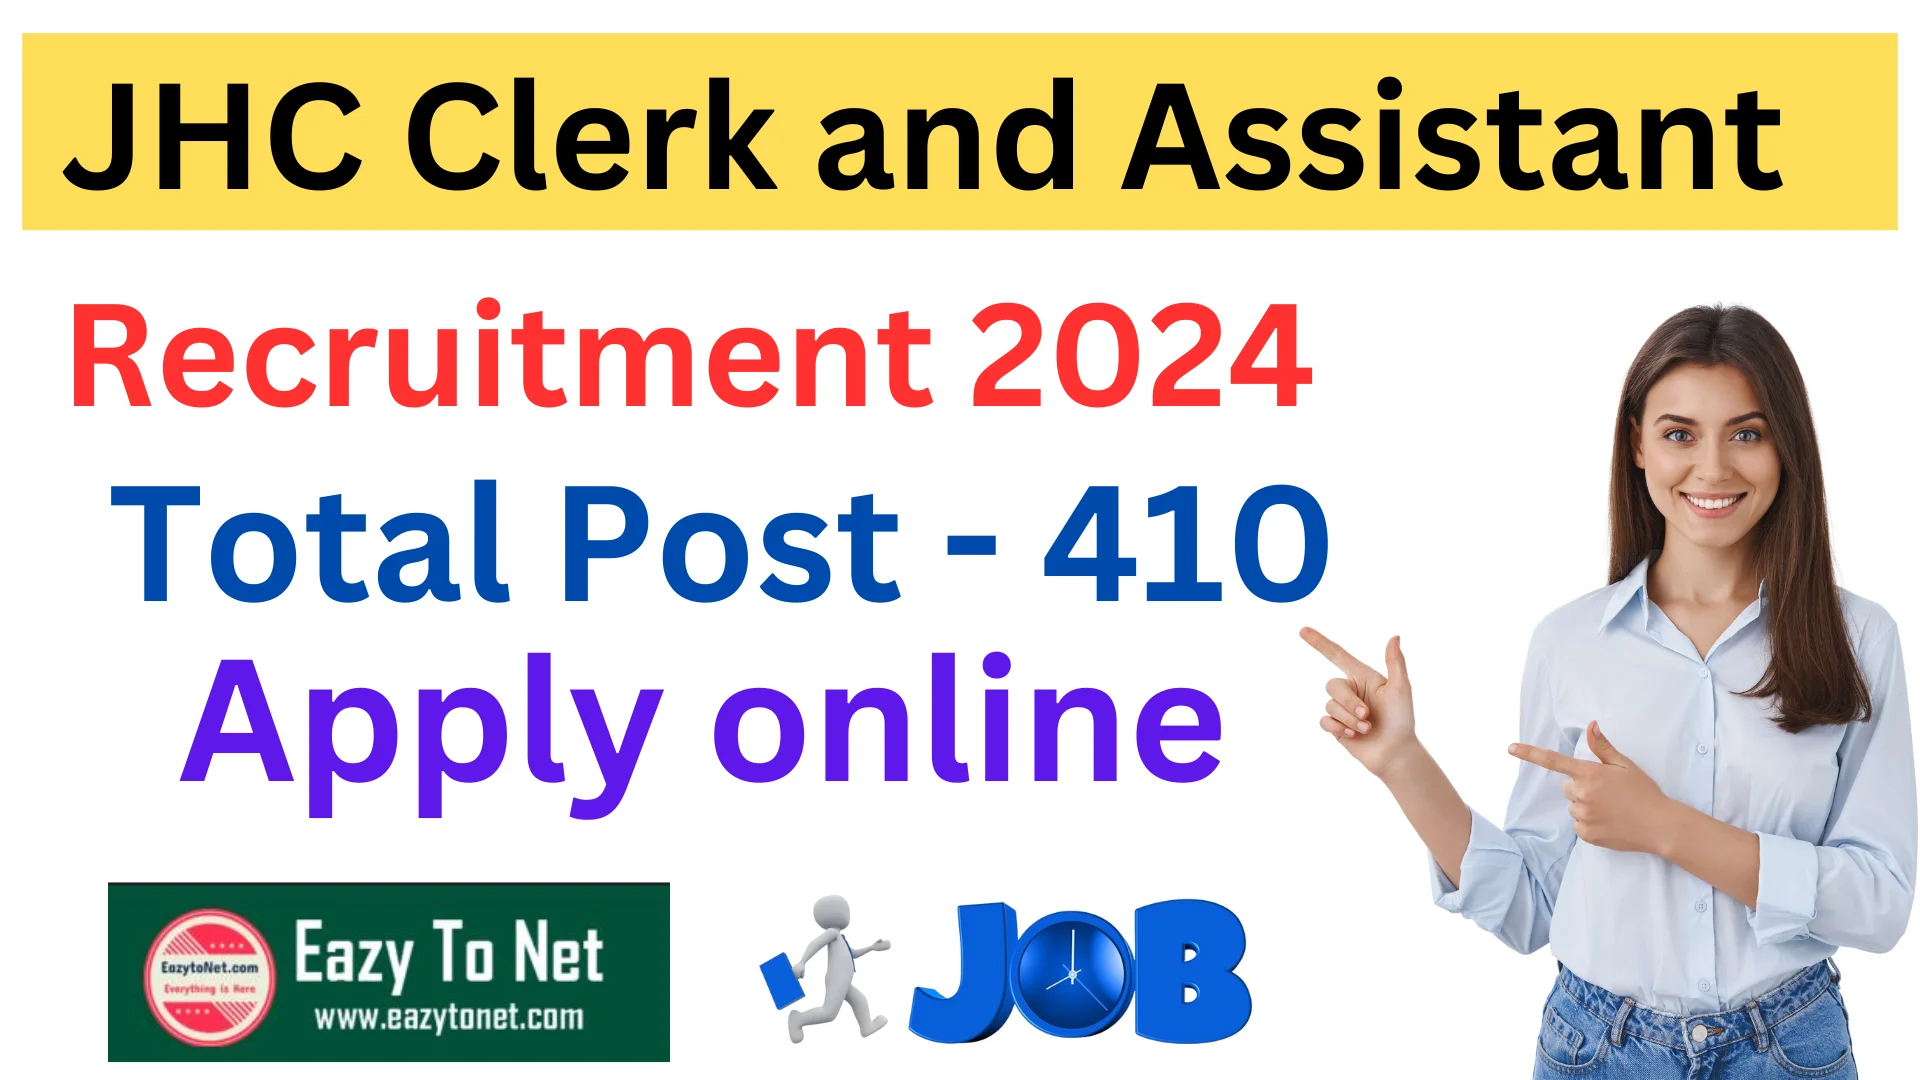 JHC Clerk and Assistant Recruitment 2024 : JHC Clerk and Assistant Vacancy 2024 Apply Online, For 410 Post